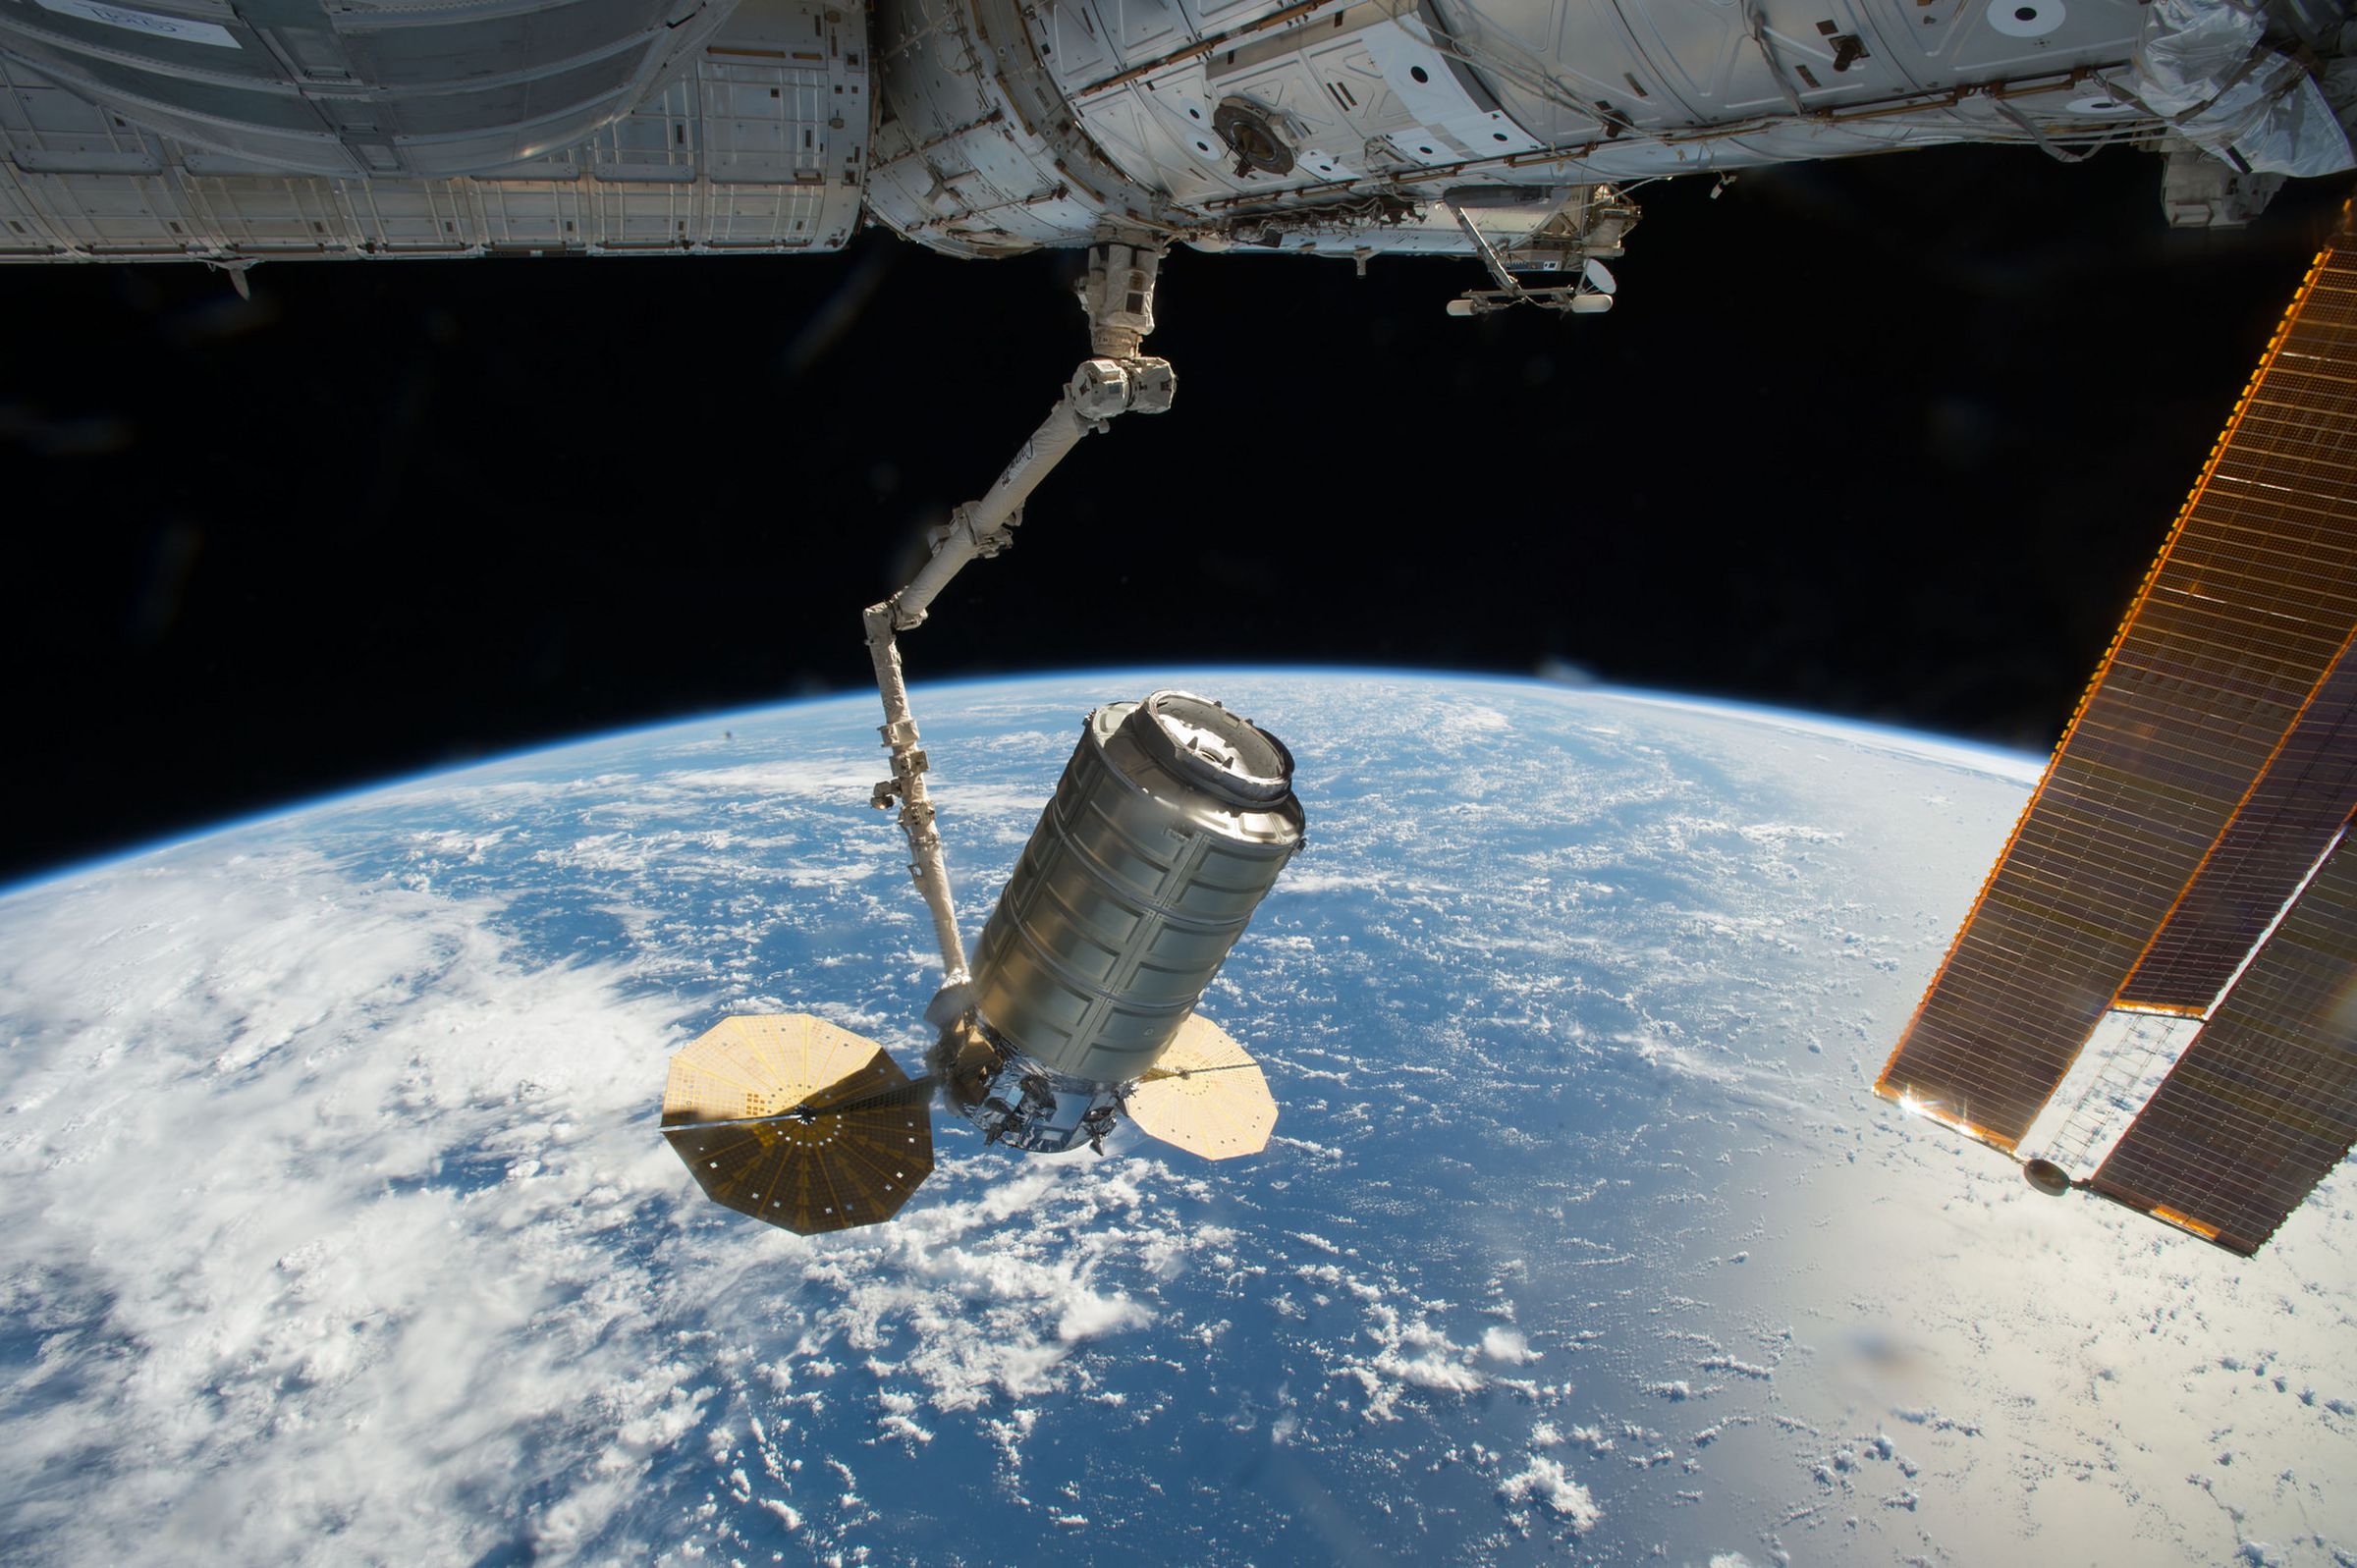 Orbital ATK’s Cygnus cargo capsule attached to the station’s robotic arm.